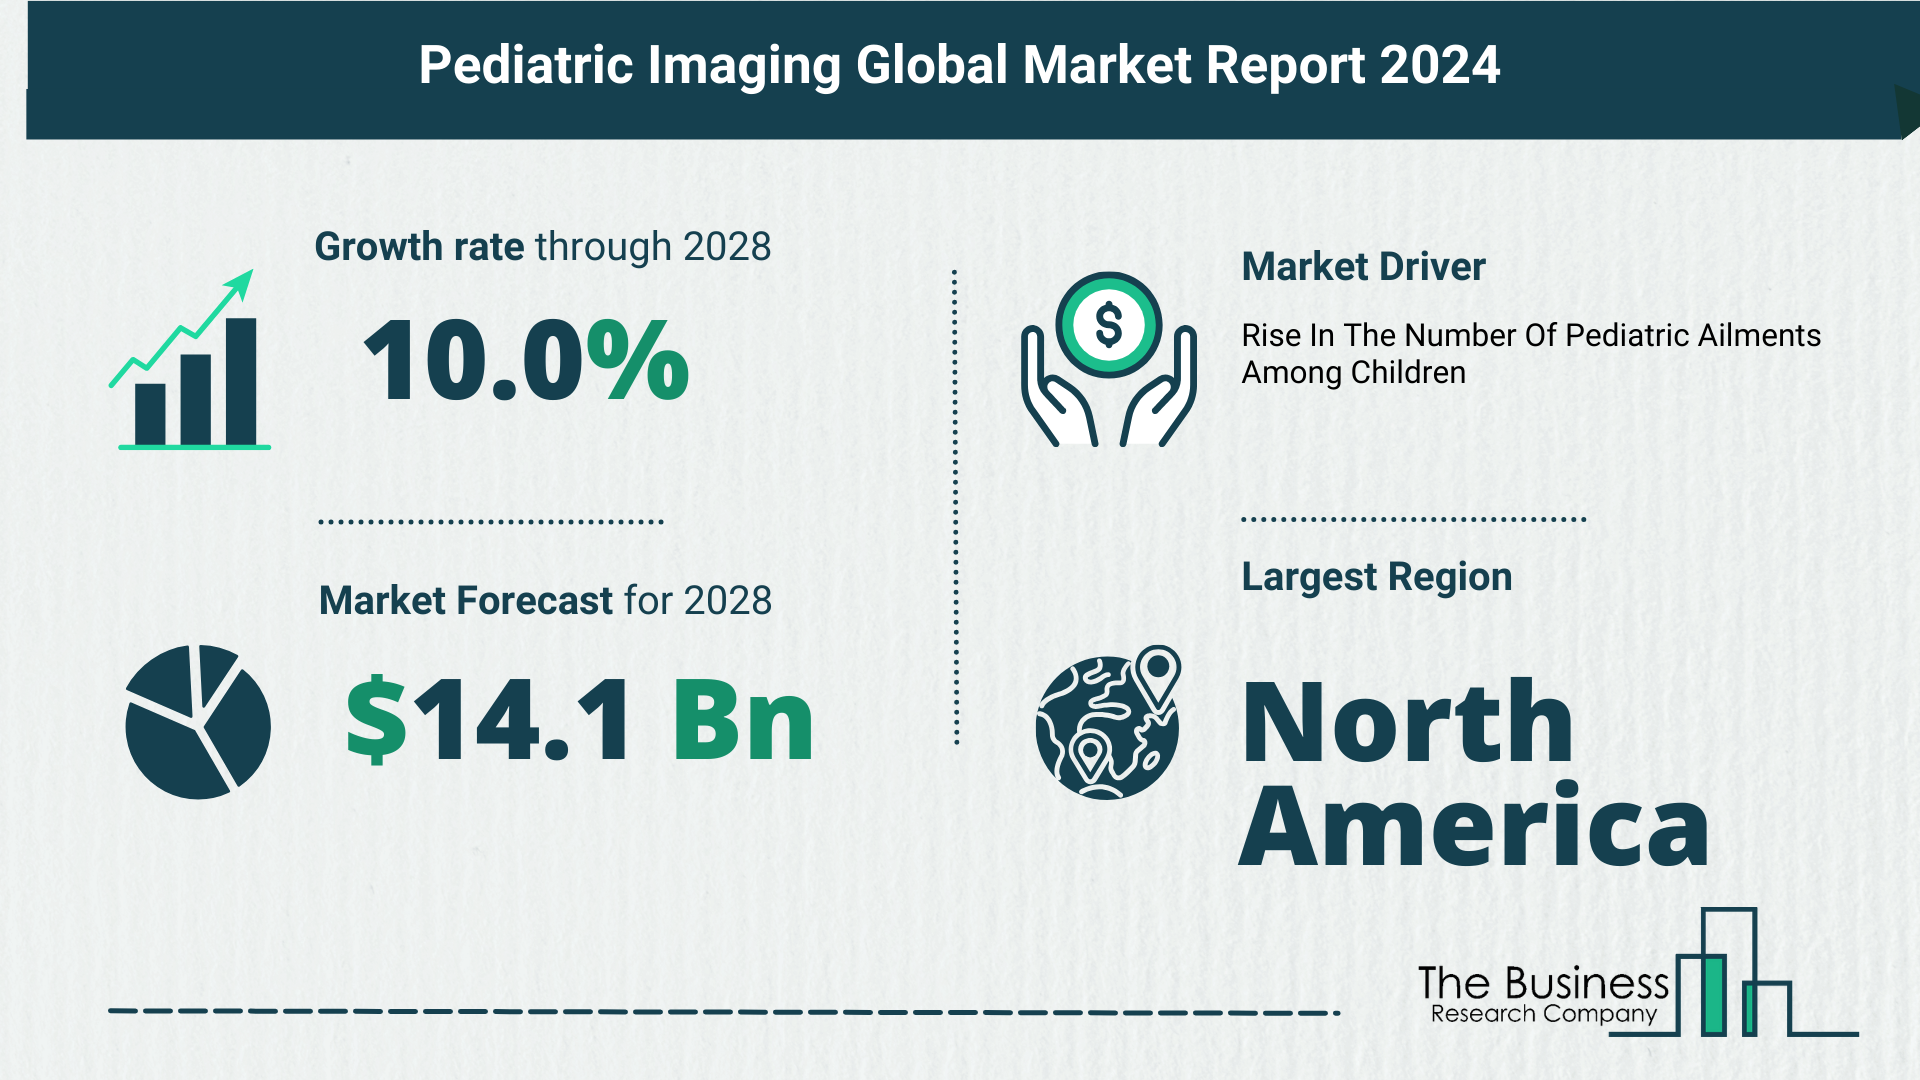 Top 5 Insights From The Pediatric Imaging Market Report 2024